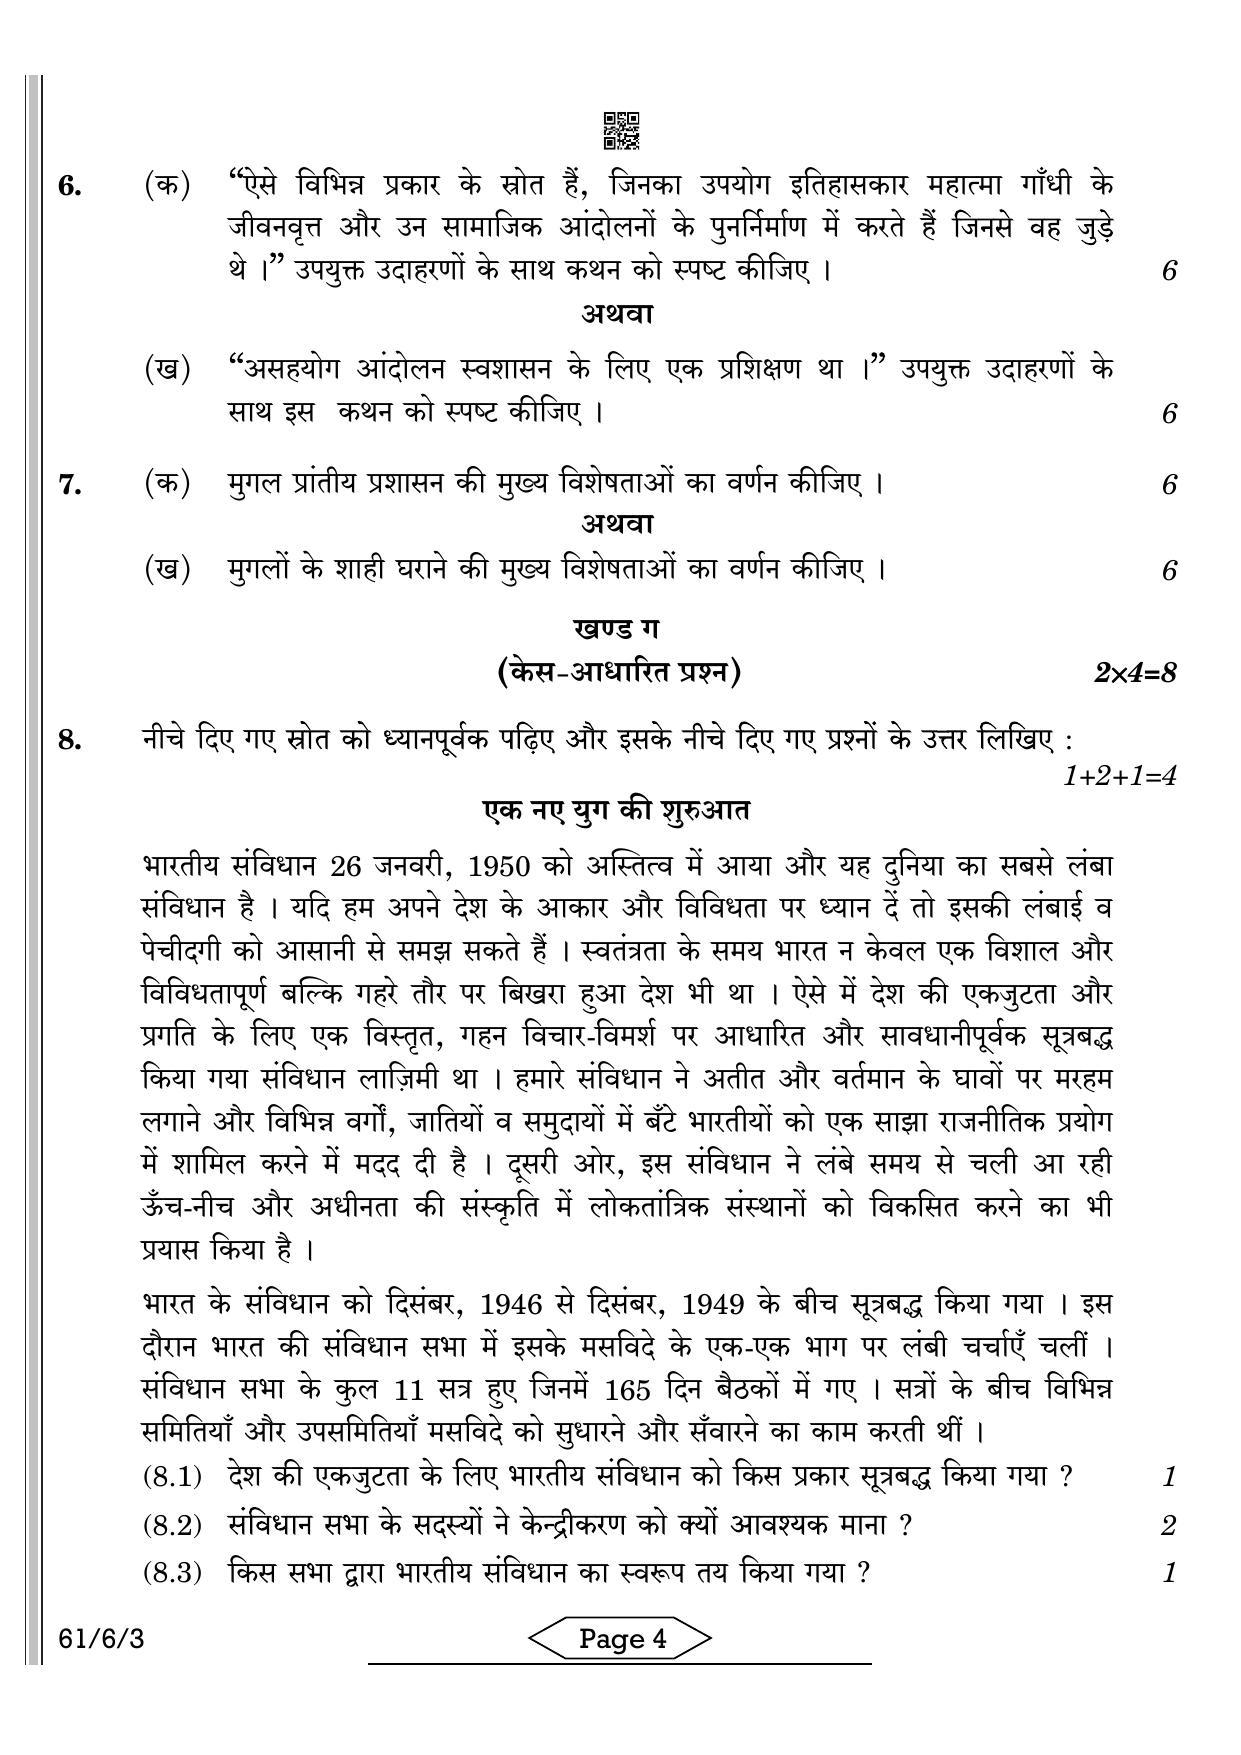 CBSE Class 12 61-6-3 HISTORY 2022 Compartment Question Paper - Page 4